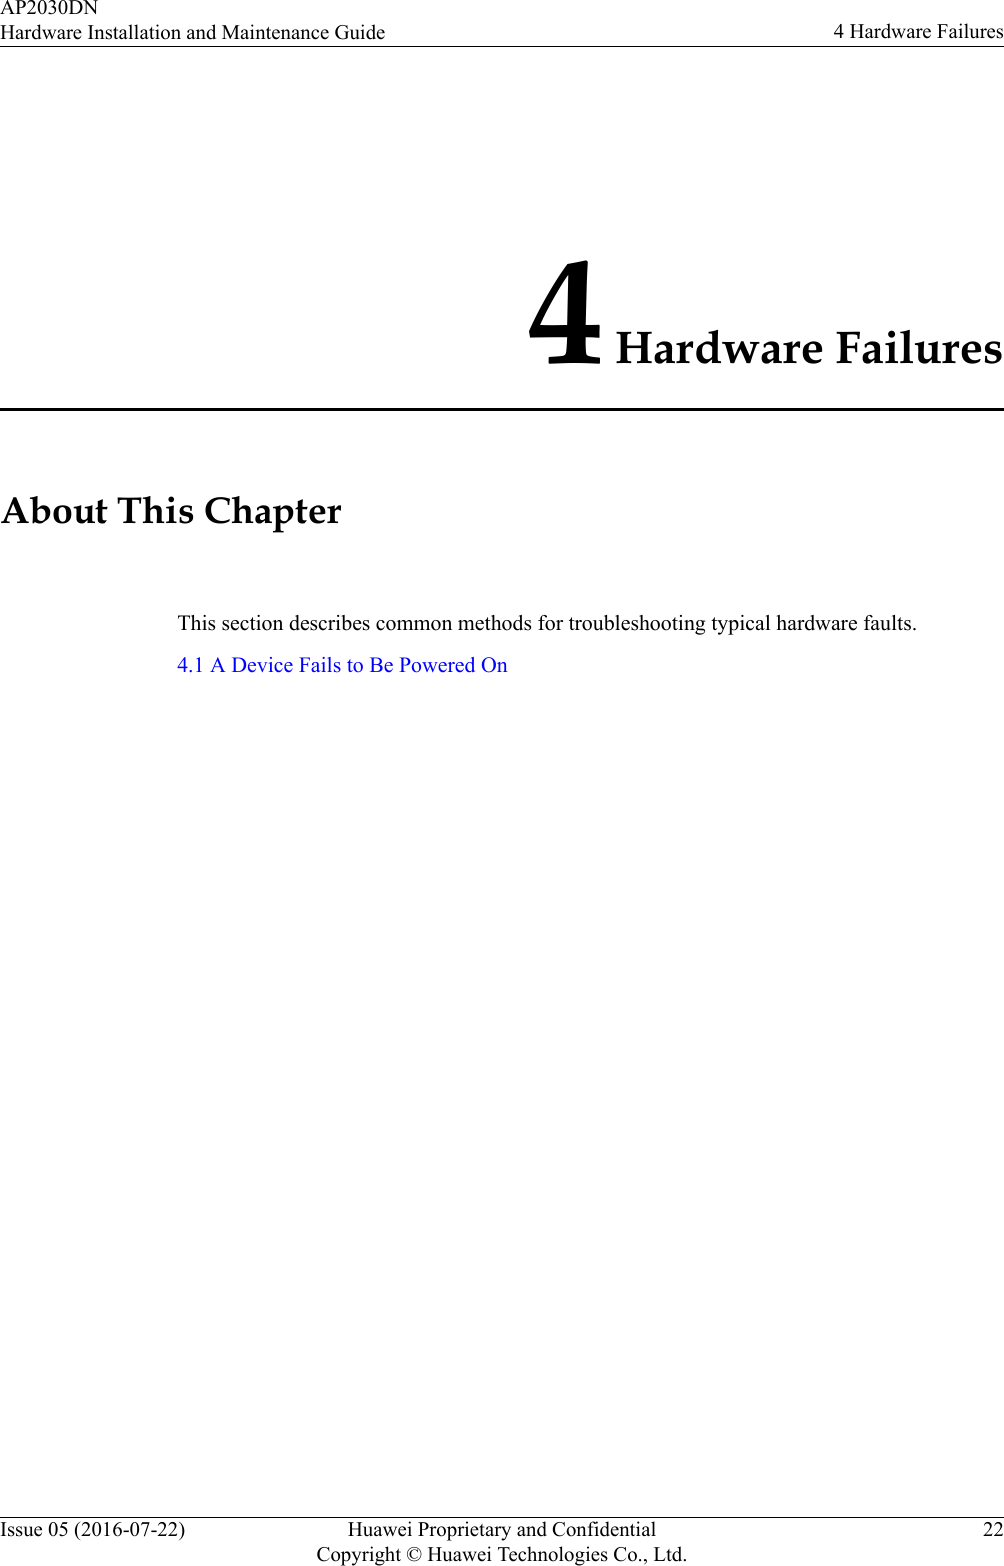 4 Hardware FailuresAbout This ChapterThis section describes common methods for troubleshooting typical hardware faults.4.1 A Device Fails to Be Powered OnAP2030DNHardware Installation and Maintenance Guide 4 Hardware FailuresIssue 05 (2016-07-22) Huawei Proprietary and ConfidentialCopyright © Huawei Technologies Co., Ltd.22